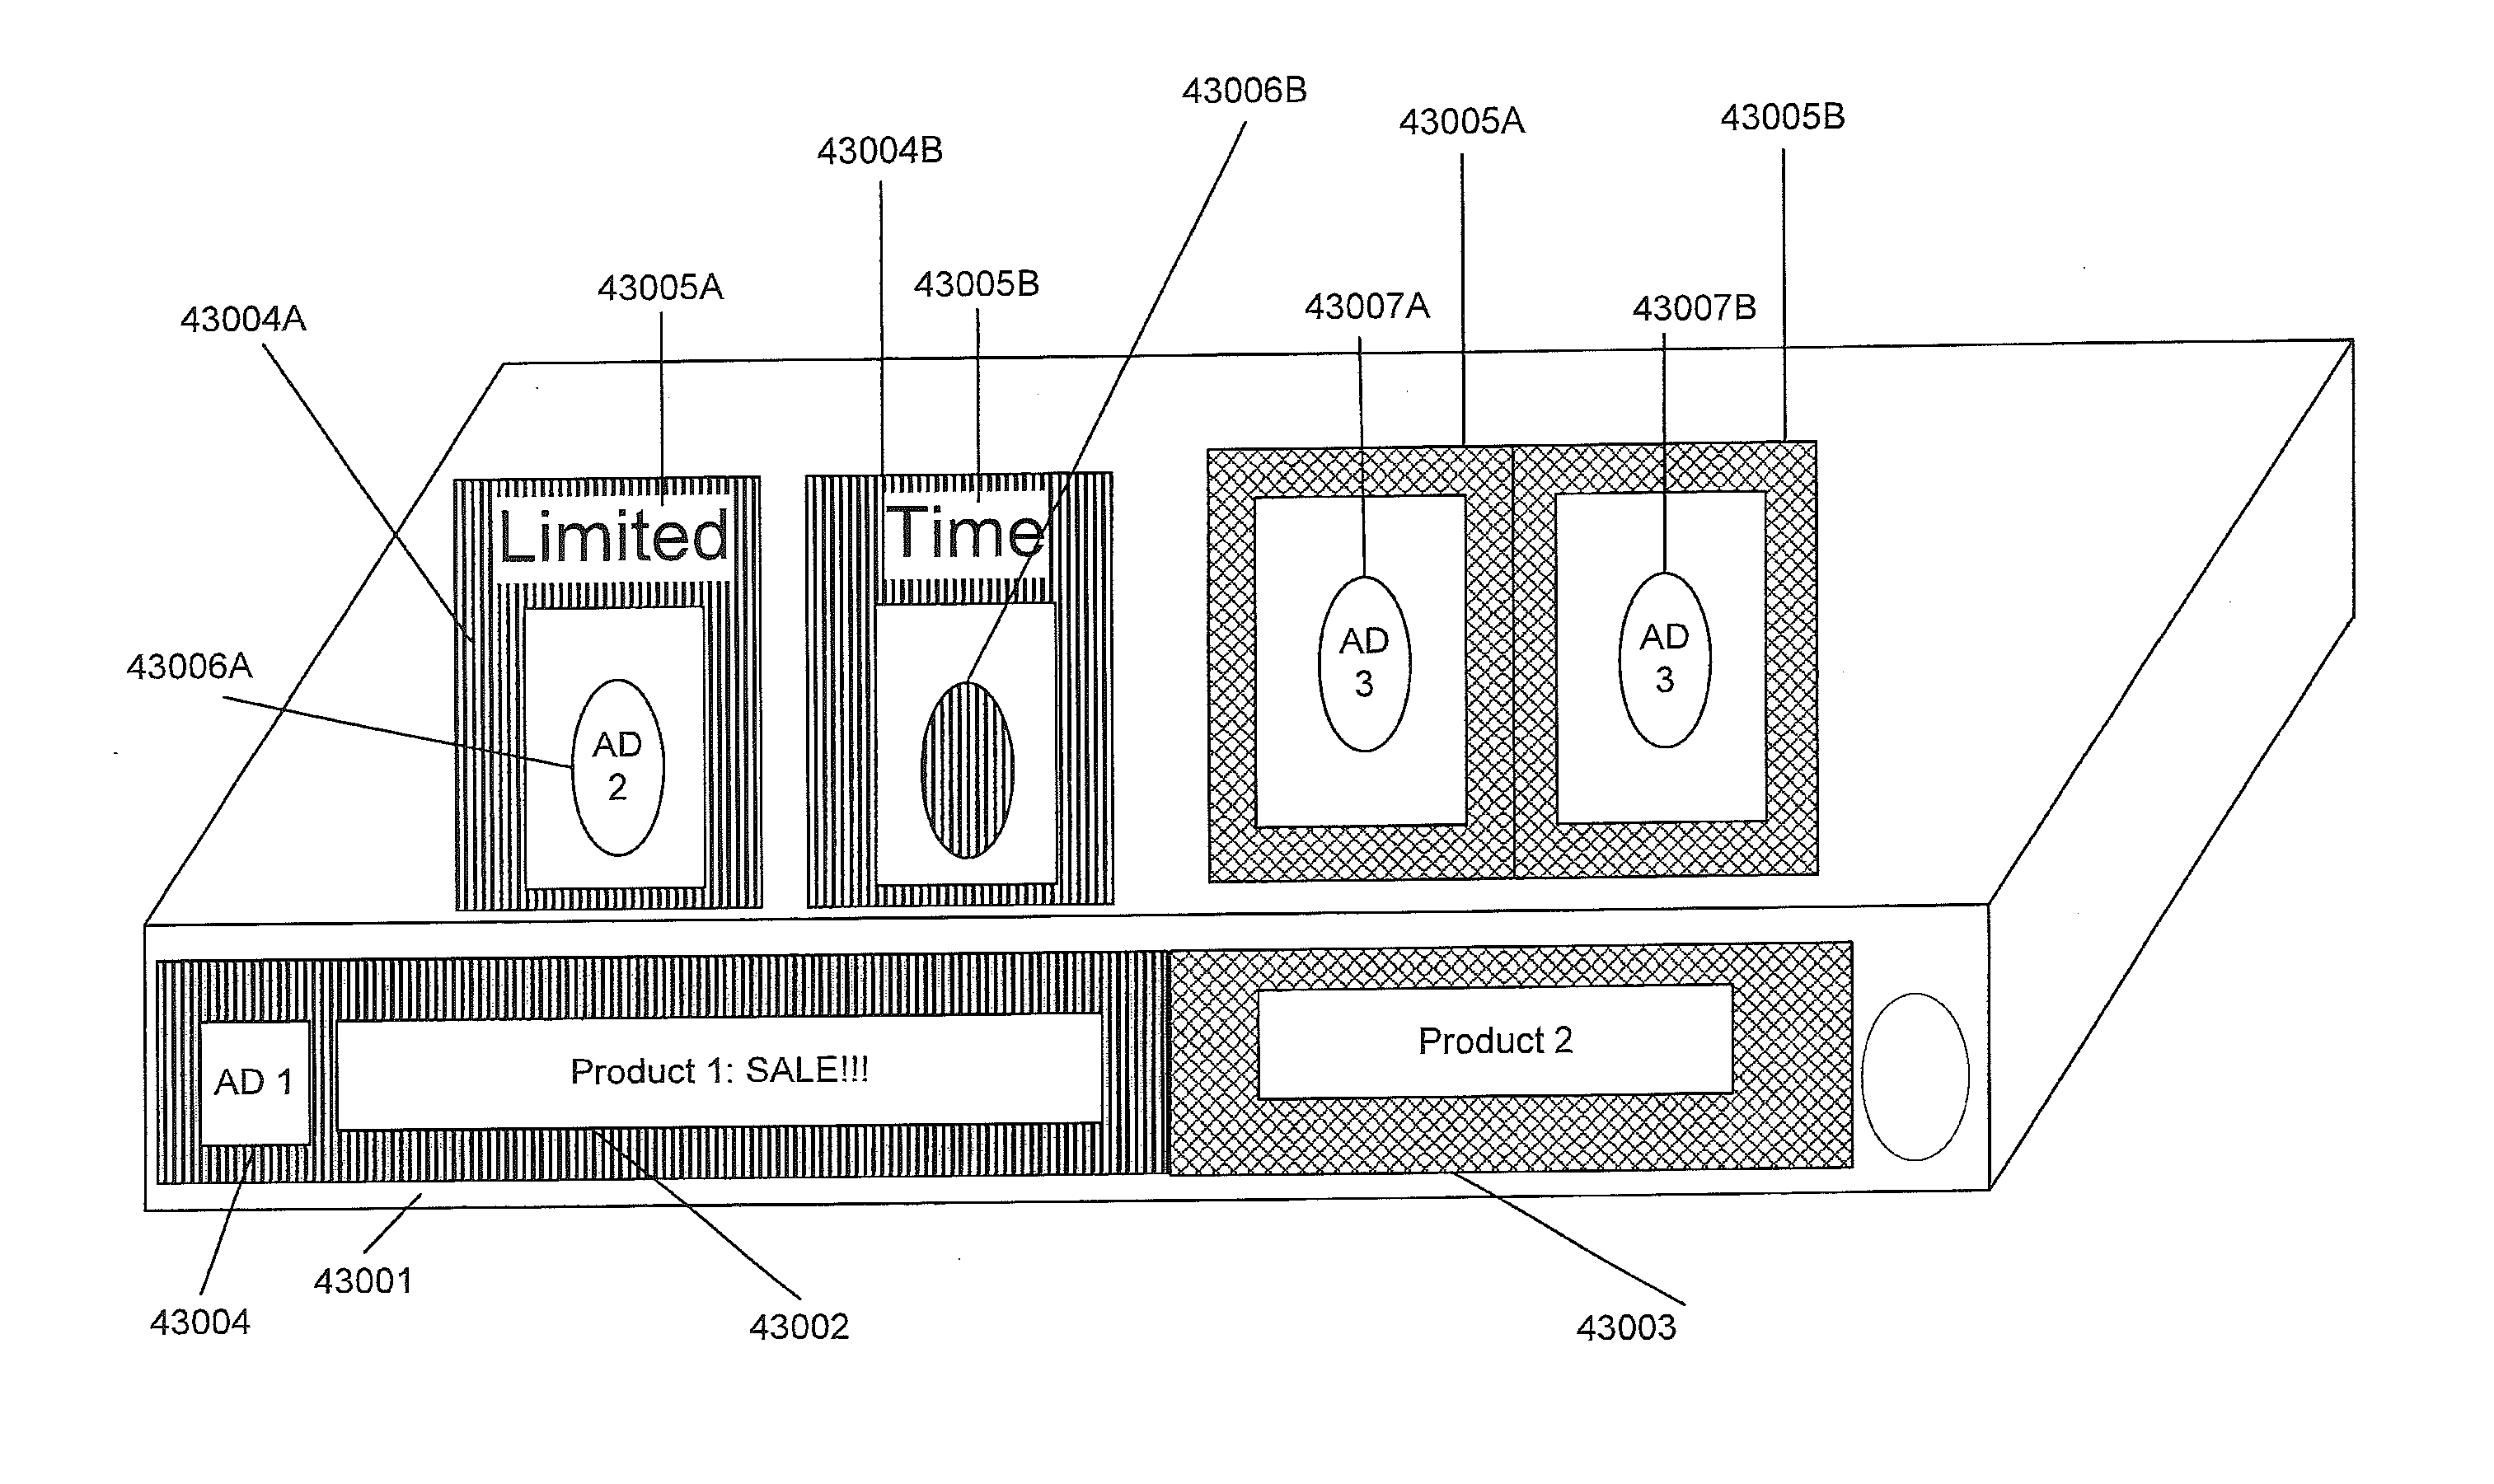 Systems and Methods for Merchandizing Electronic Displays